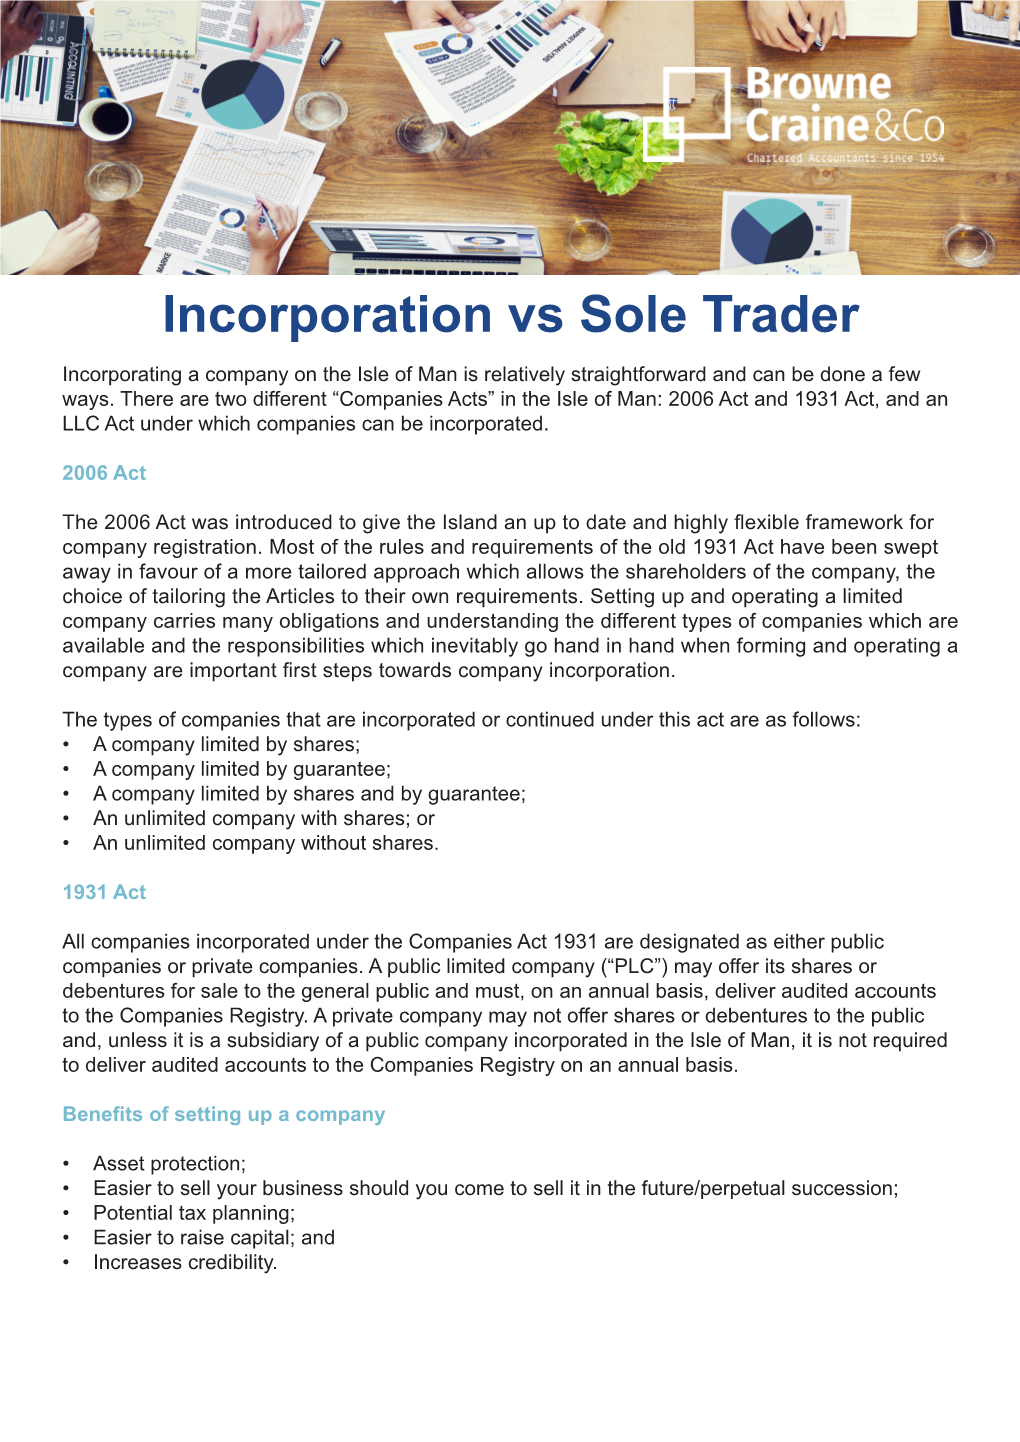 Incorporation Vs Sole Trader Incorporating a Company on the Isle of Man Is Relatively Straightforward and Can Be Done a Few Ways